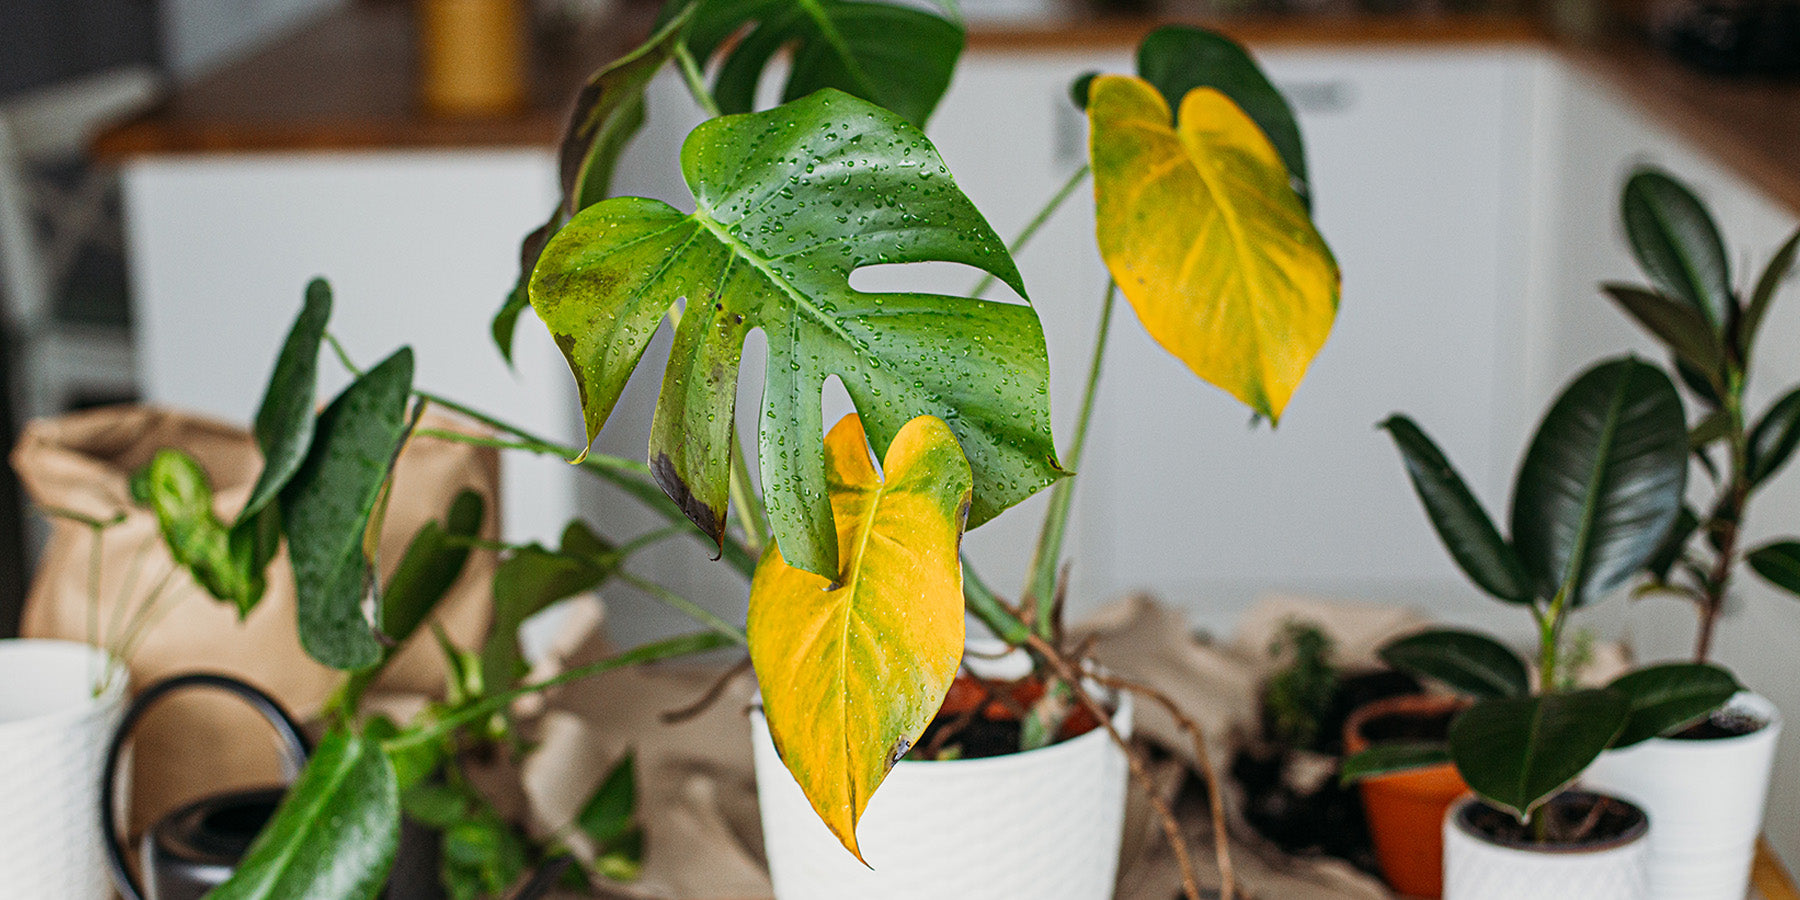 Why do my plants turn yellow?